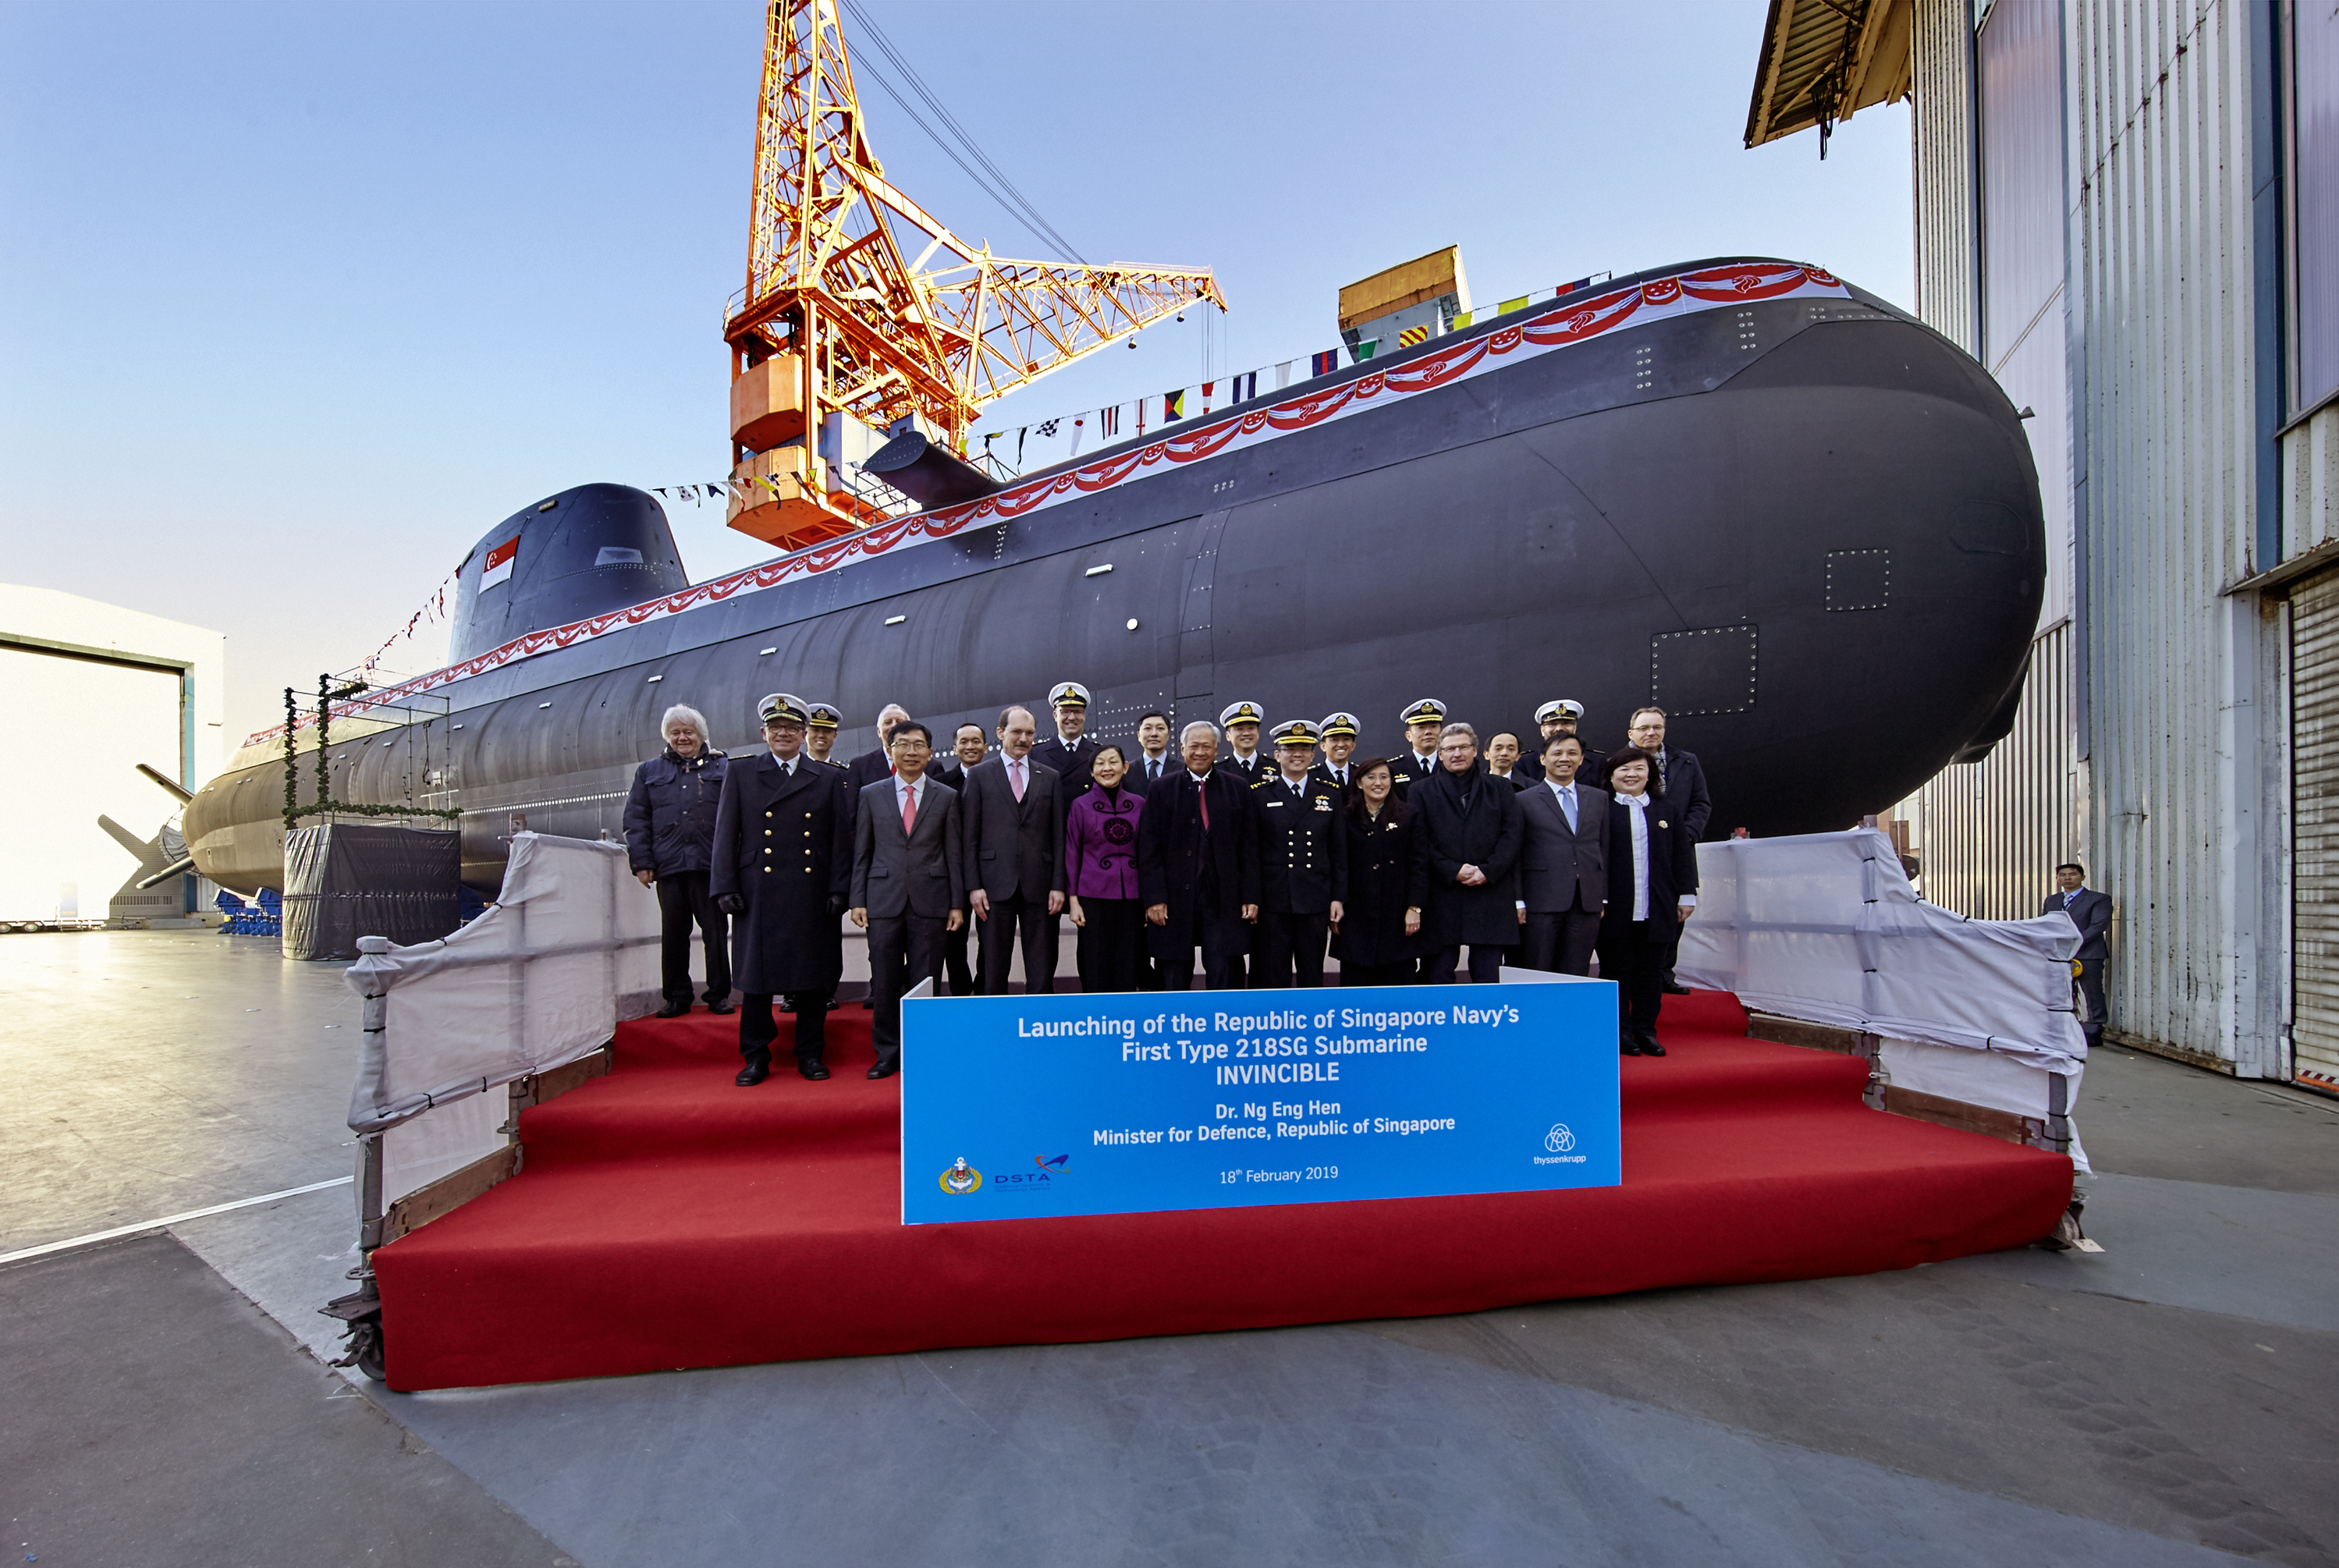 Launching ceremony of the Class 218SG submarine Invincible. Photo via Thyssenkrupp.